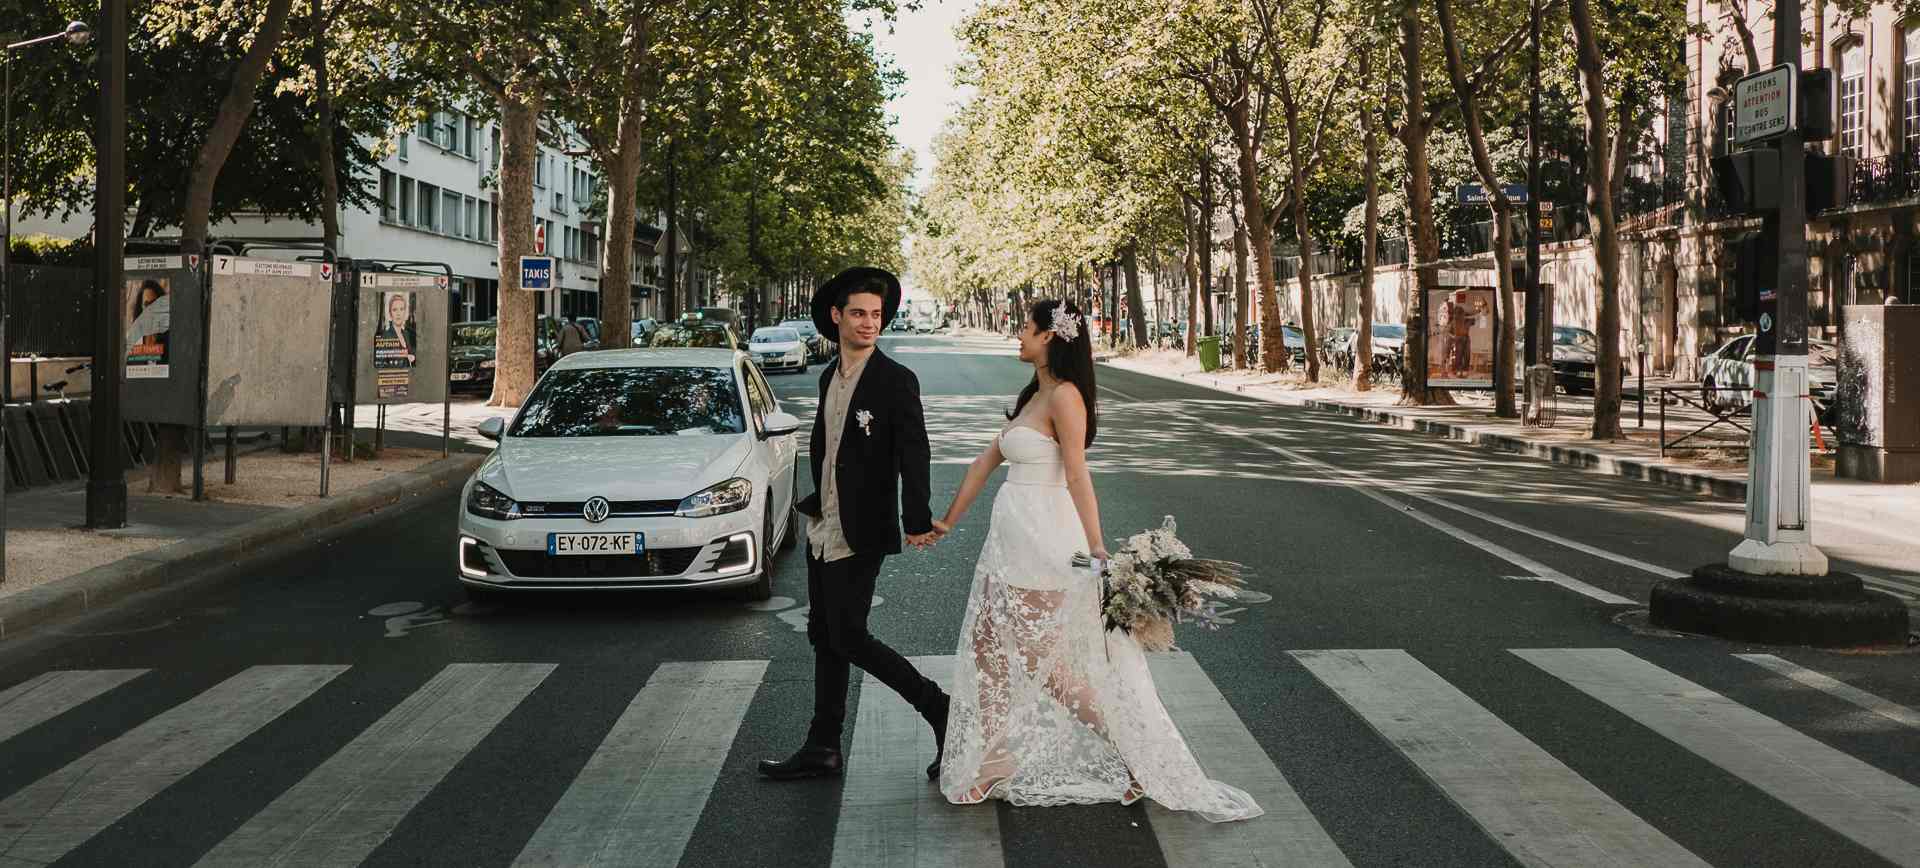 couple photoshoot in paris, france